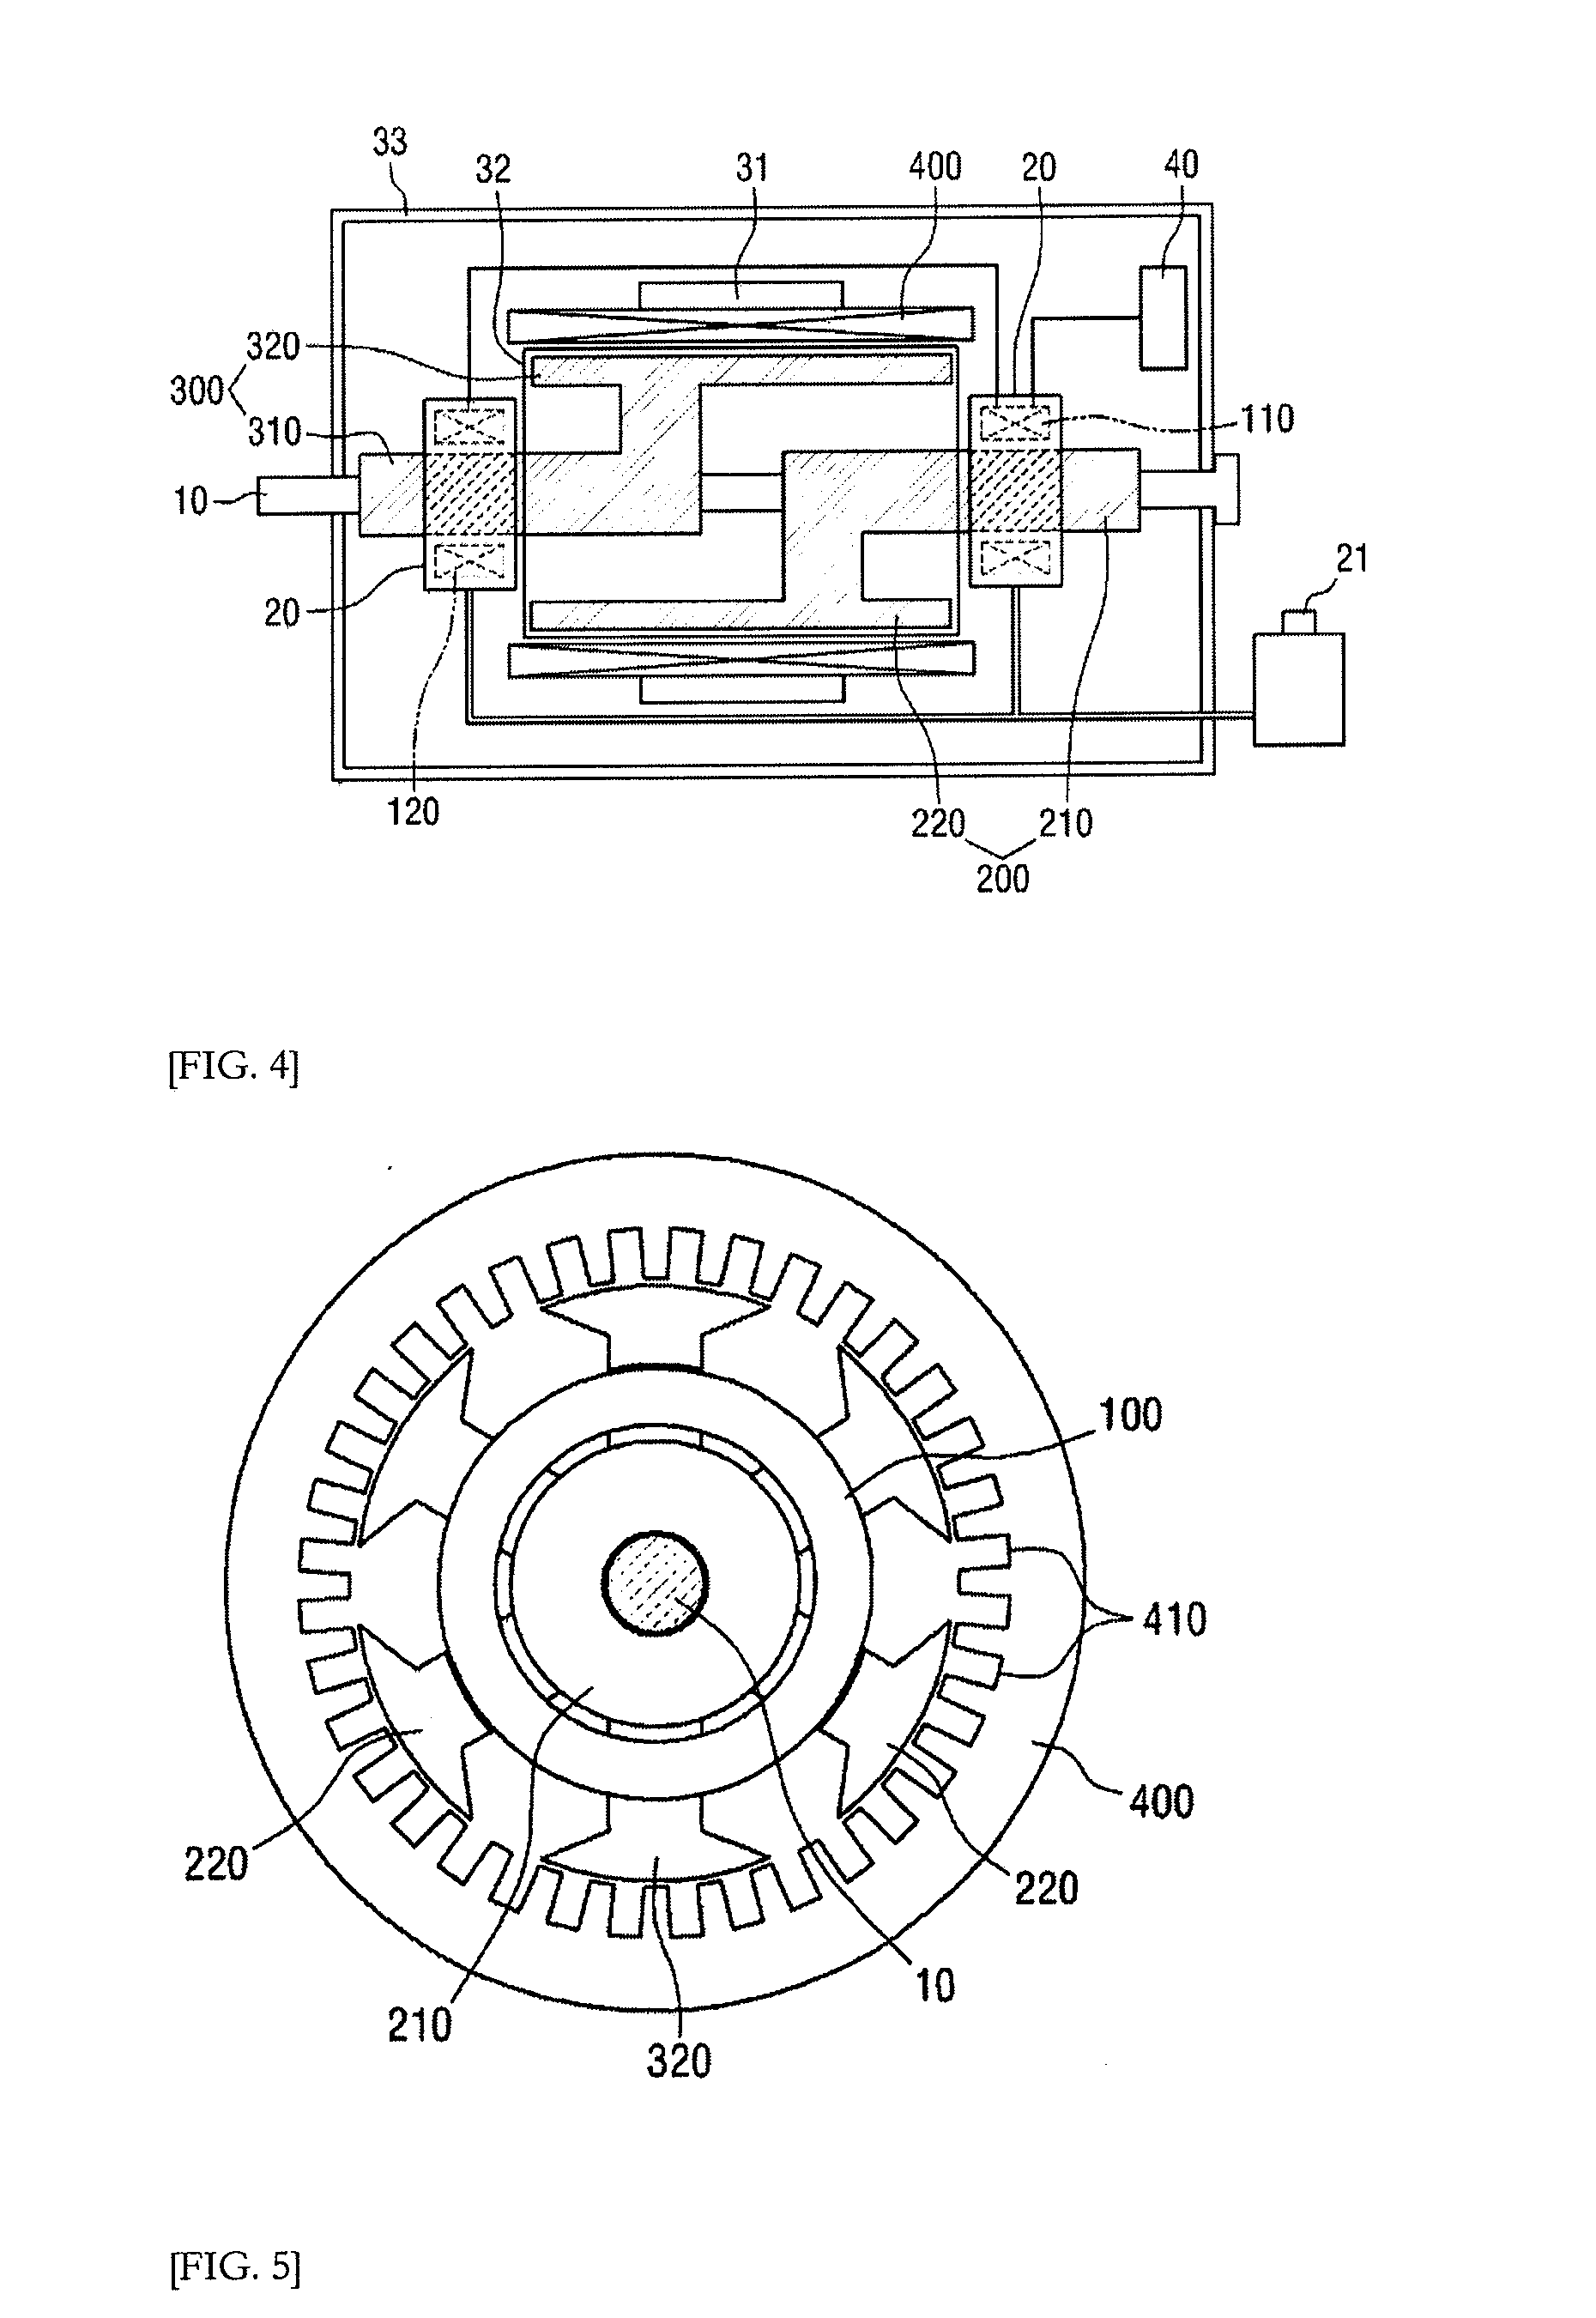 Superconducting synchronous motor